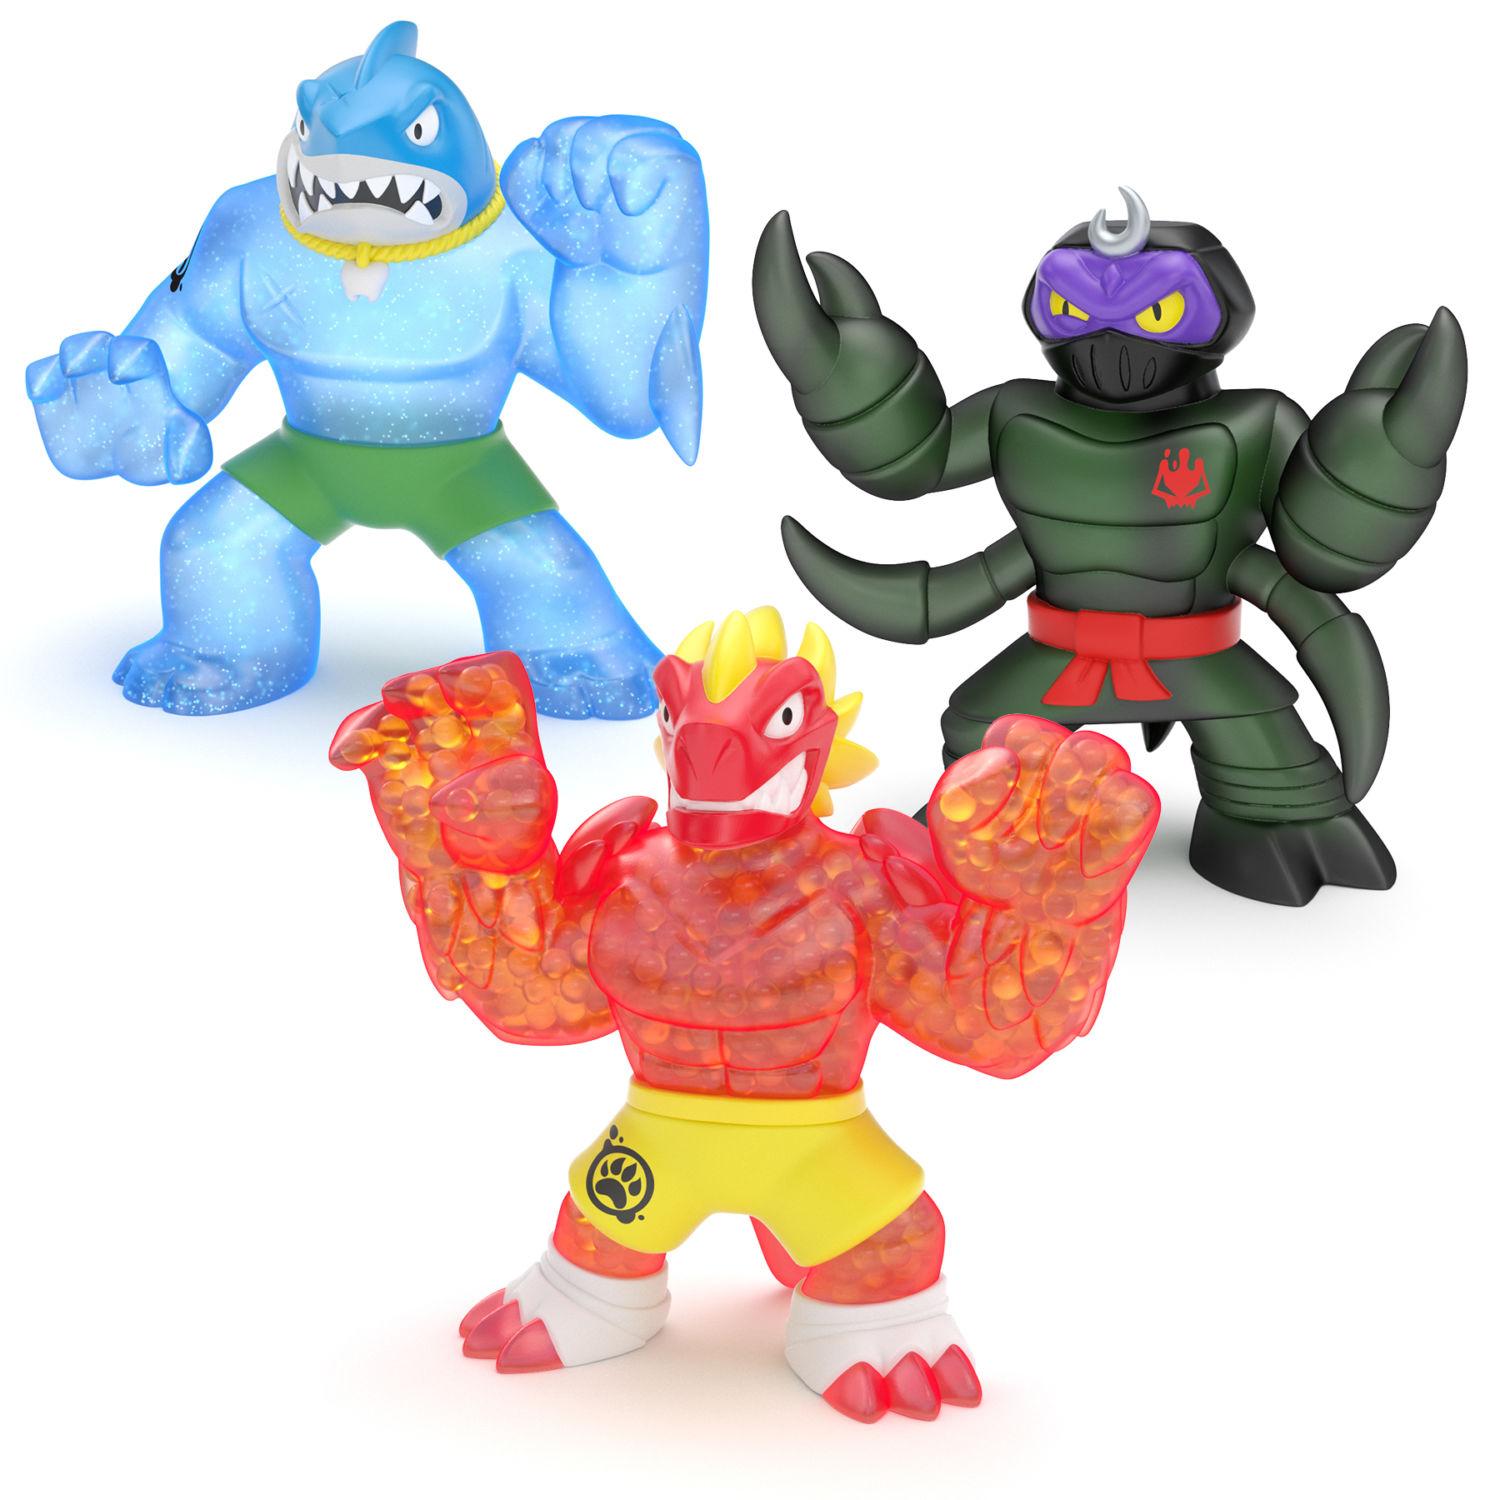 Squish, Stretch, and Flex with Heroes of Goo Jit Zu The Toy Insider